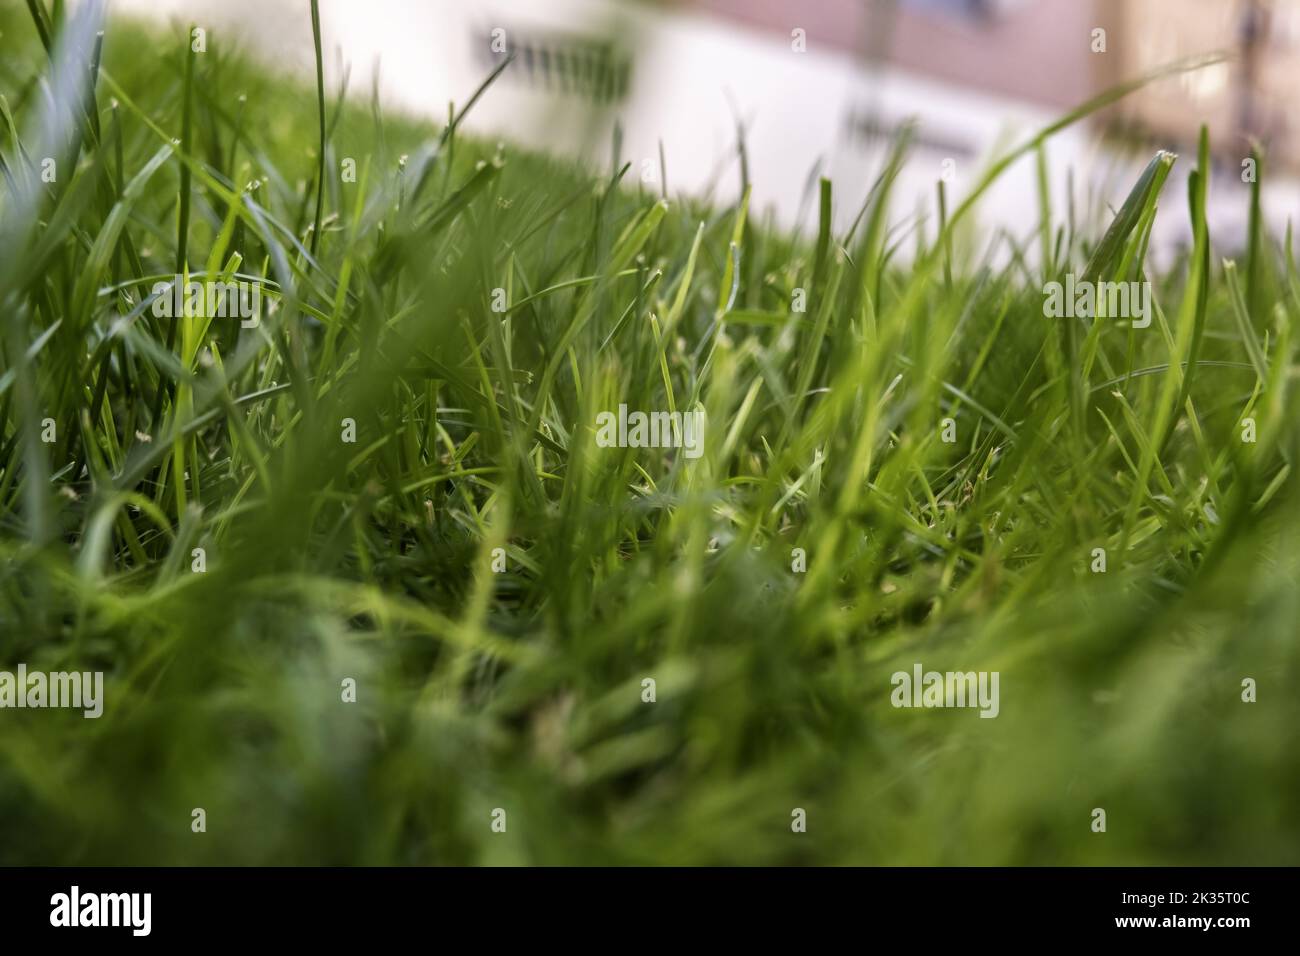 Detail of lawn in a garden, decoration with plants Stock Photo